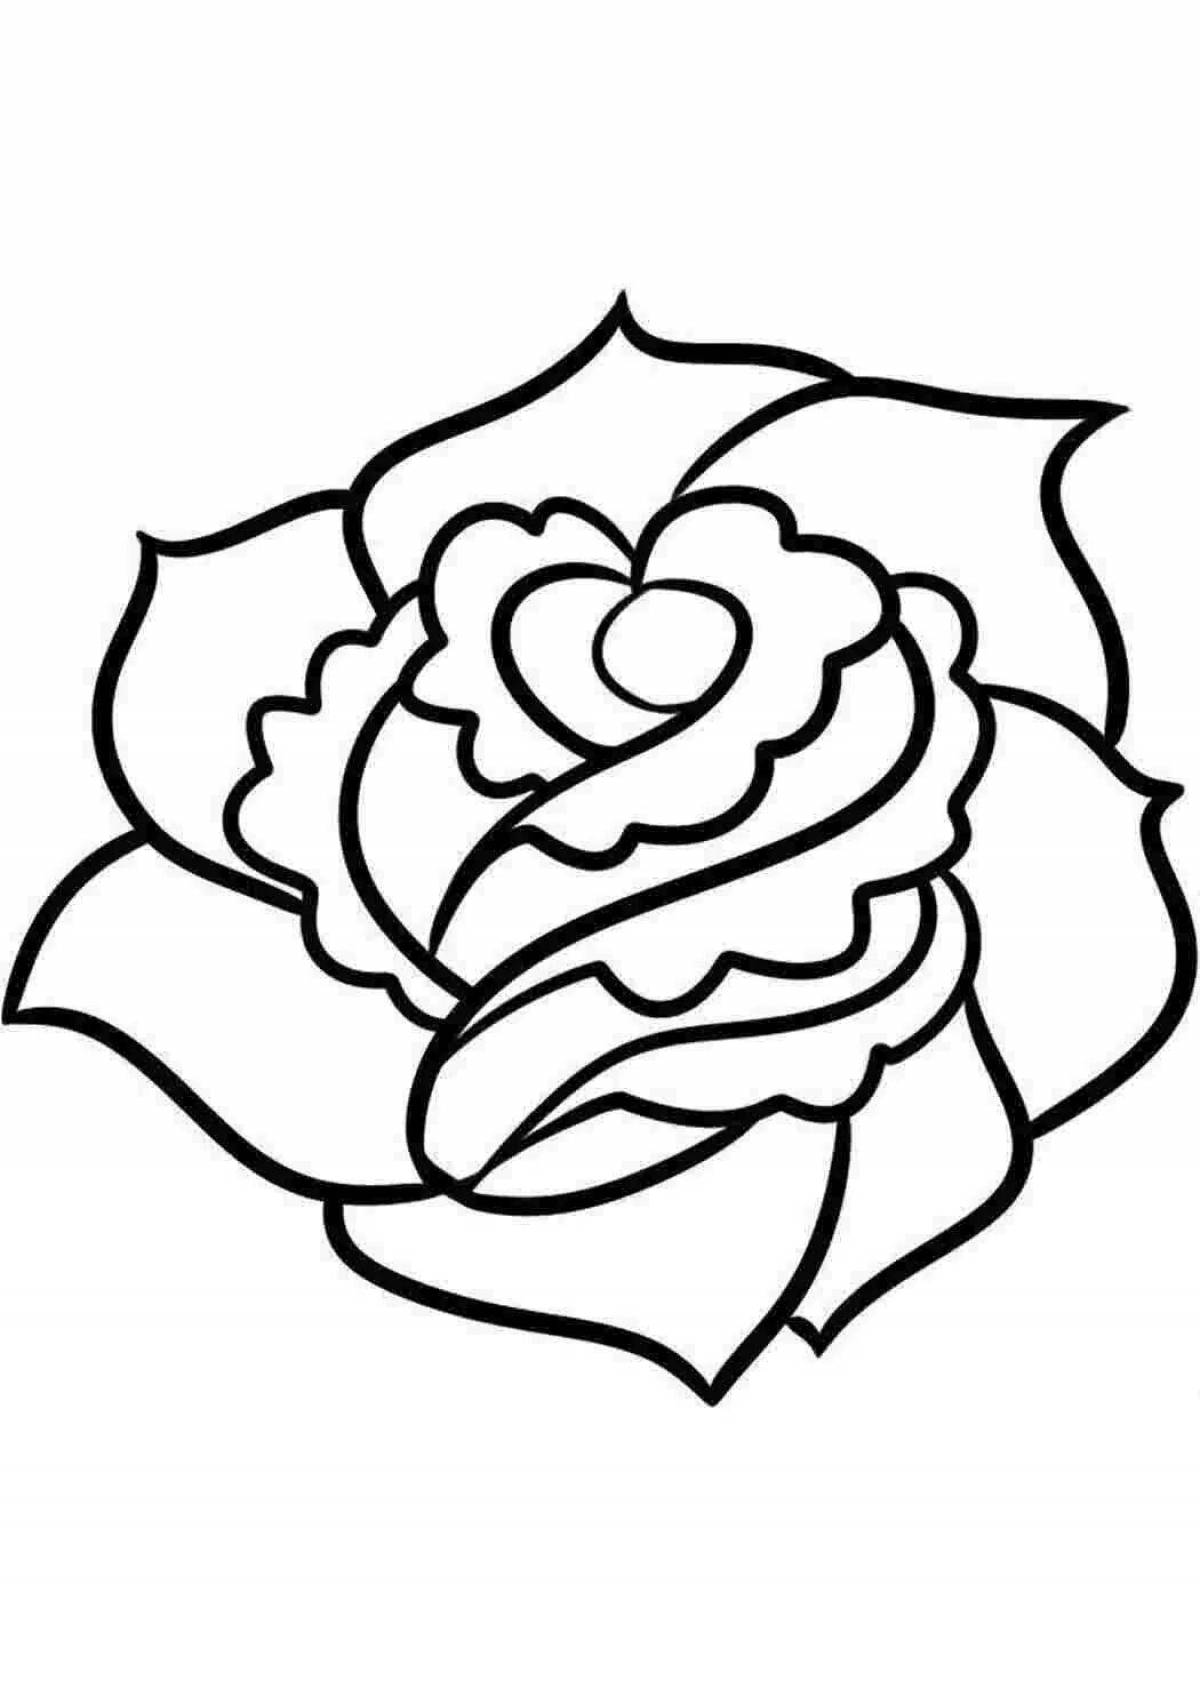 Coloring book dazzling rose for girls